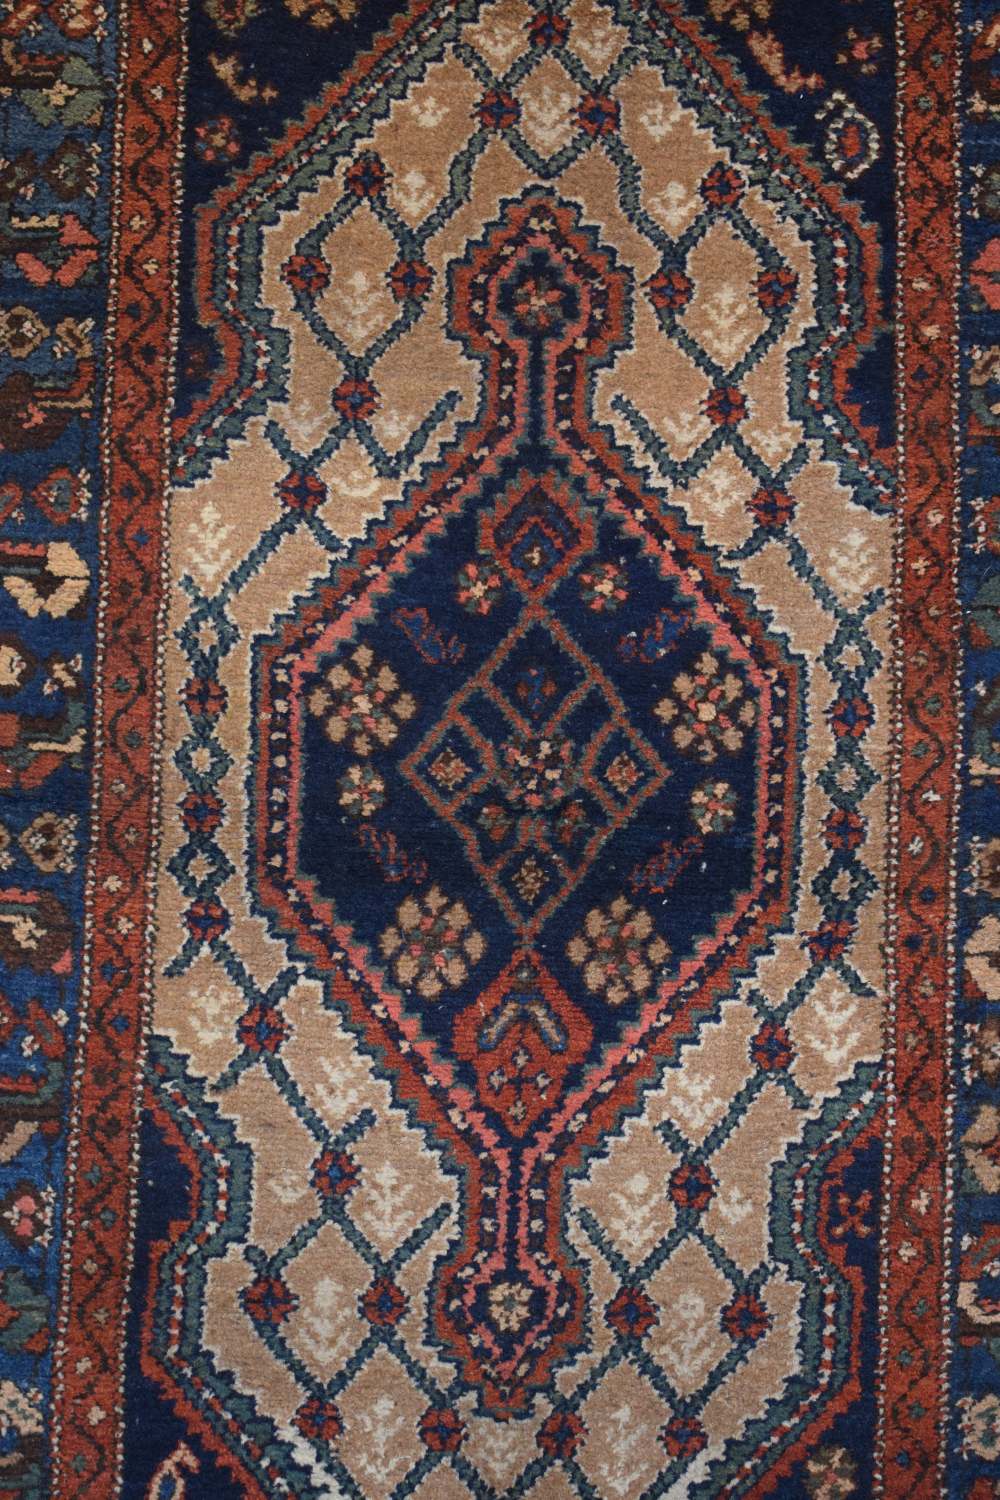 Attractive Sarab rug, Hamadan area, north west Persia, circa 1920s, 6ft. 6in. x 3ft. 9in. 1.98m. x - Image 7 of 8